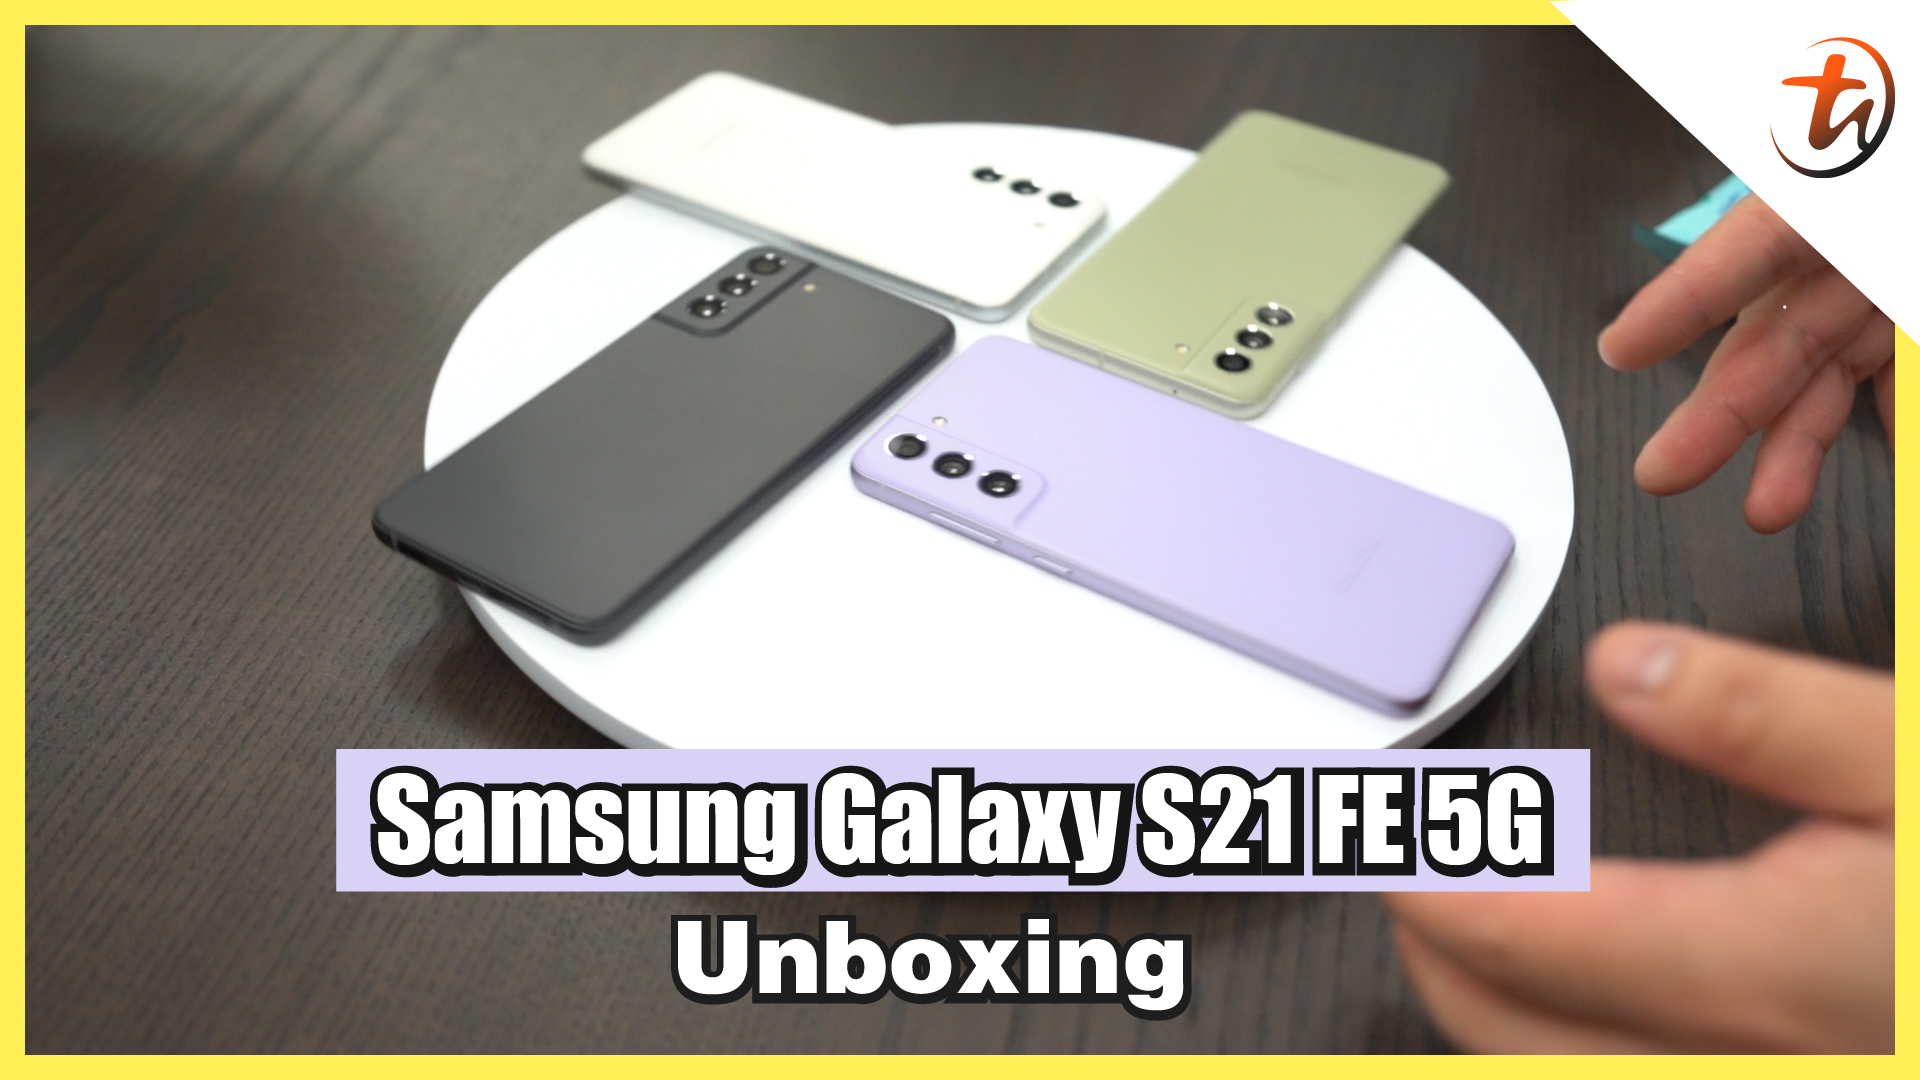 Samsung Galaxy S21 FE - Great specs with budget price | TechNave Unboxing and Hands-On Video